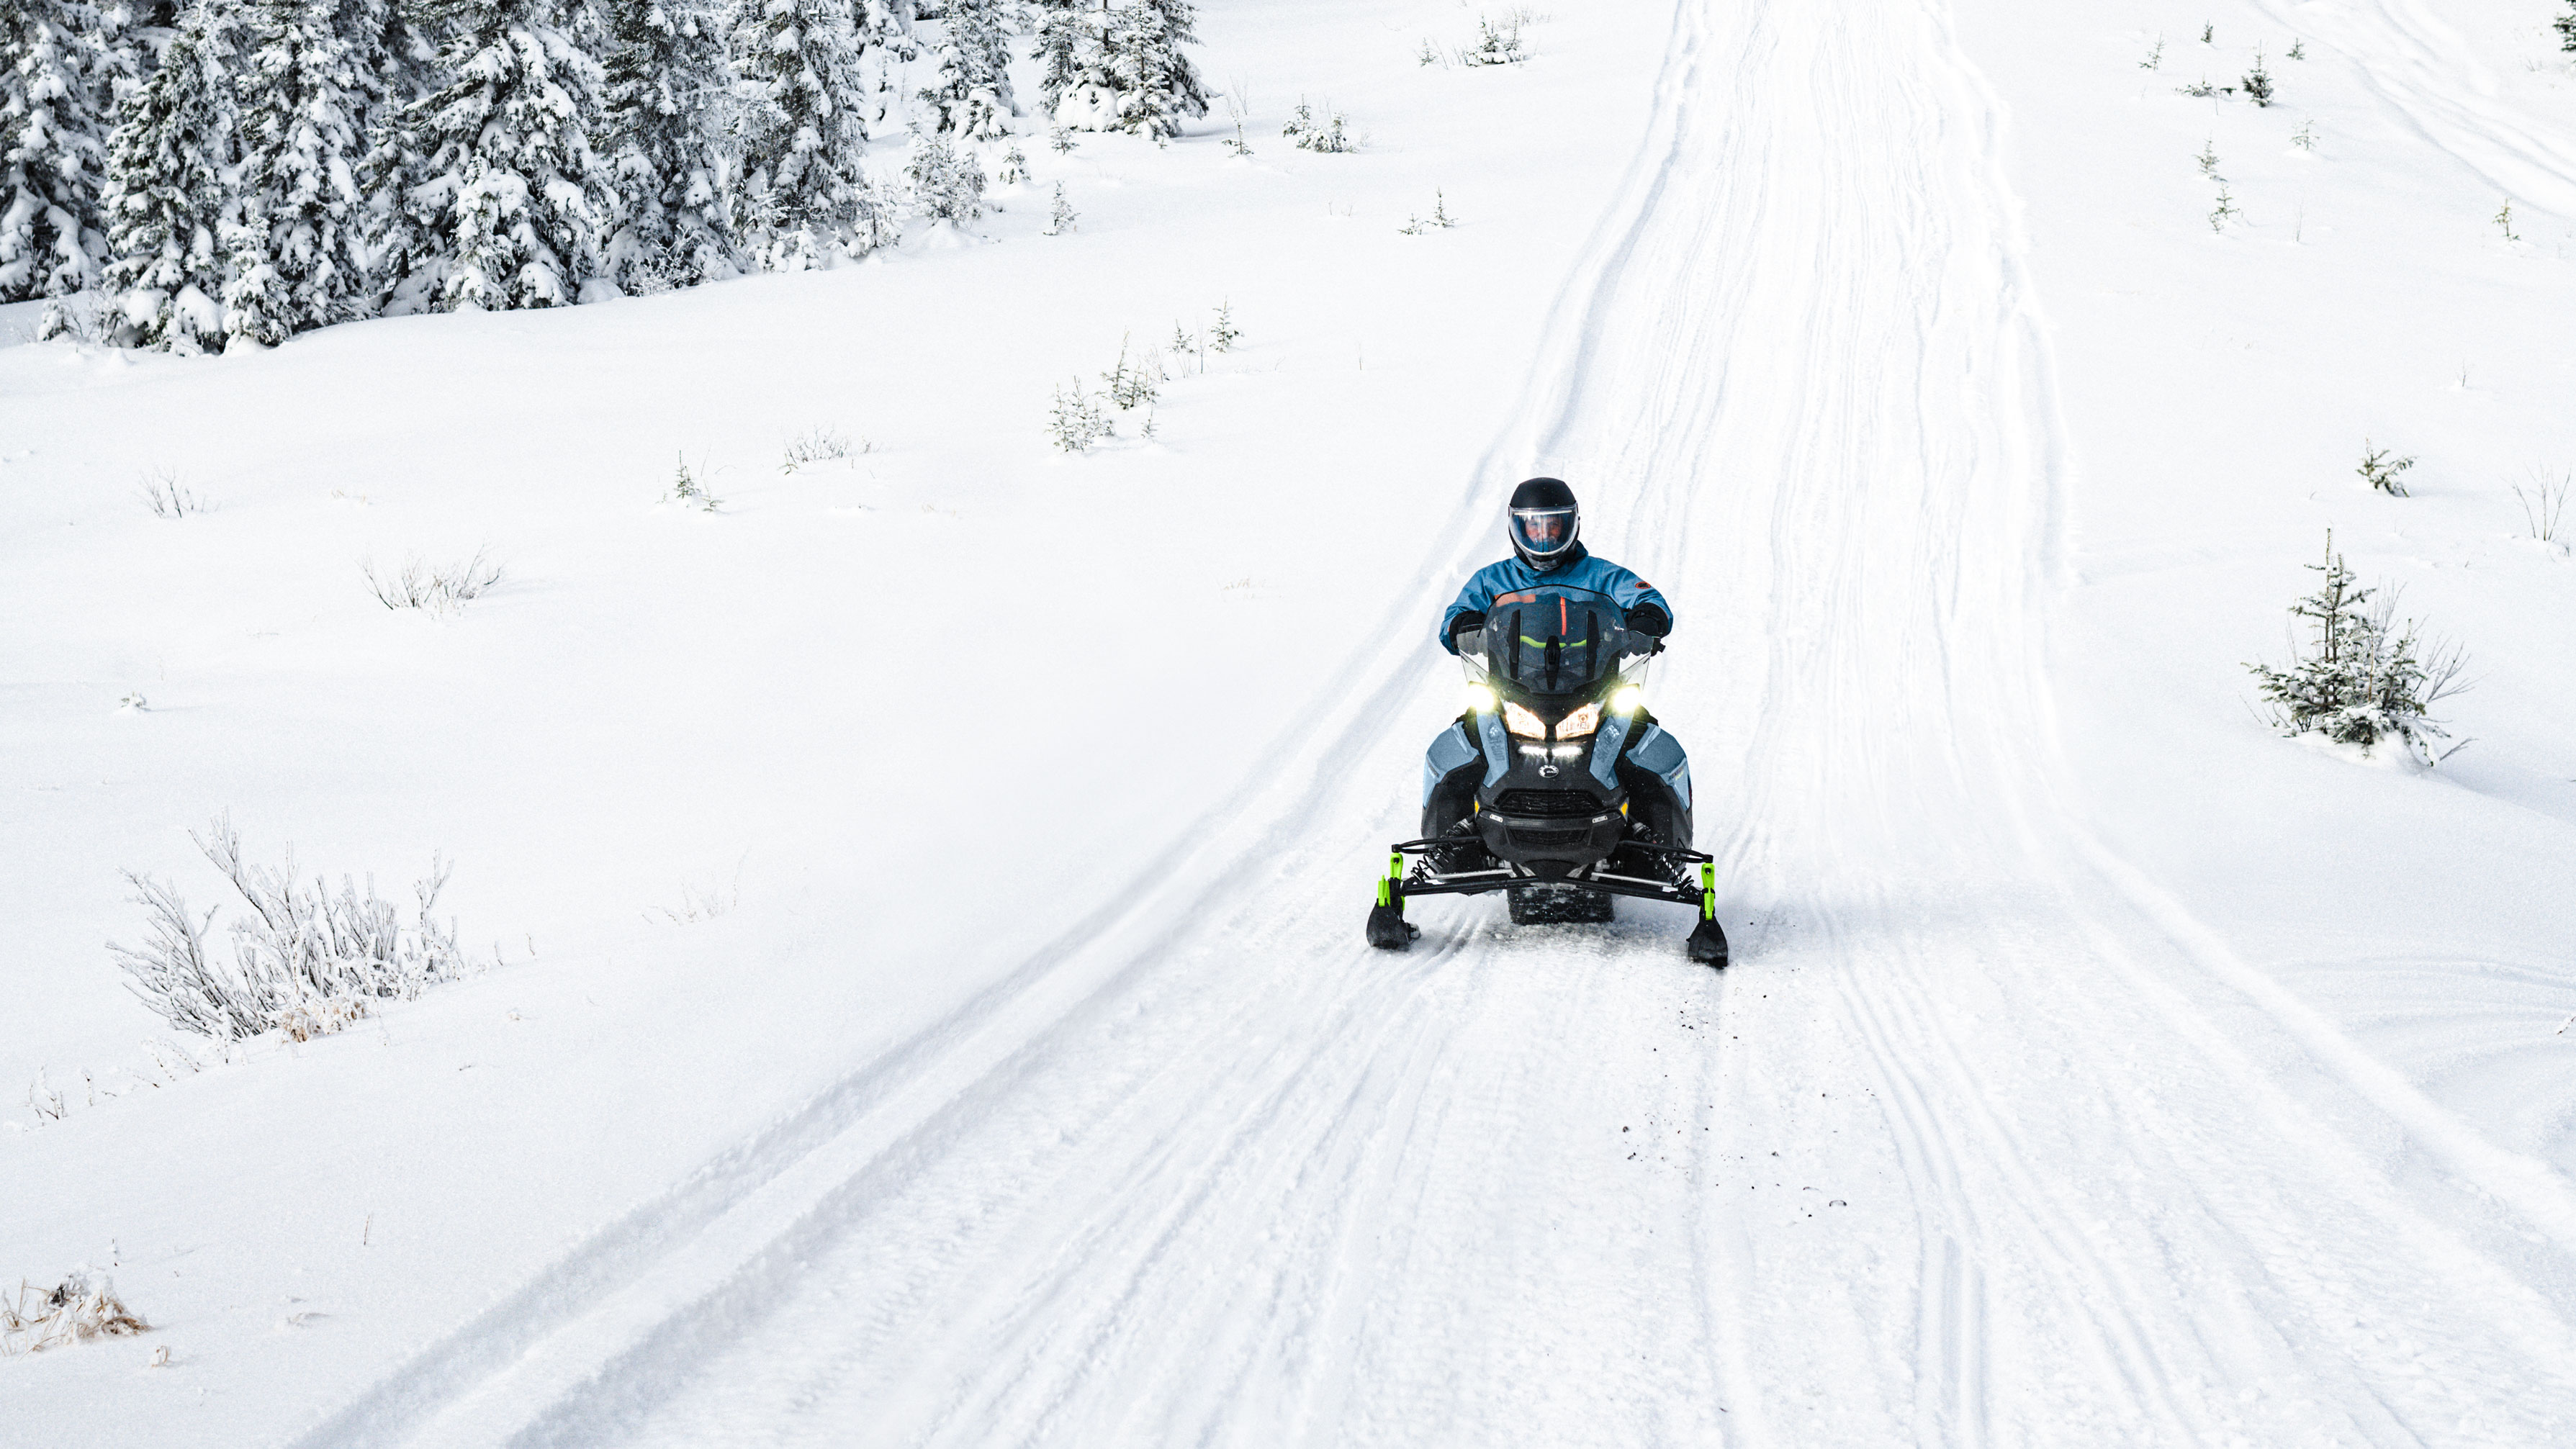 HOW TO SAFELY RIDE A SNOWMOBILE?